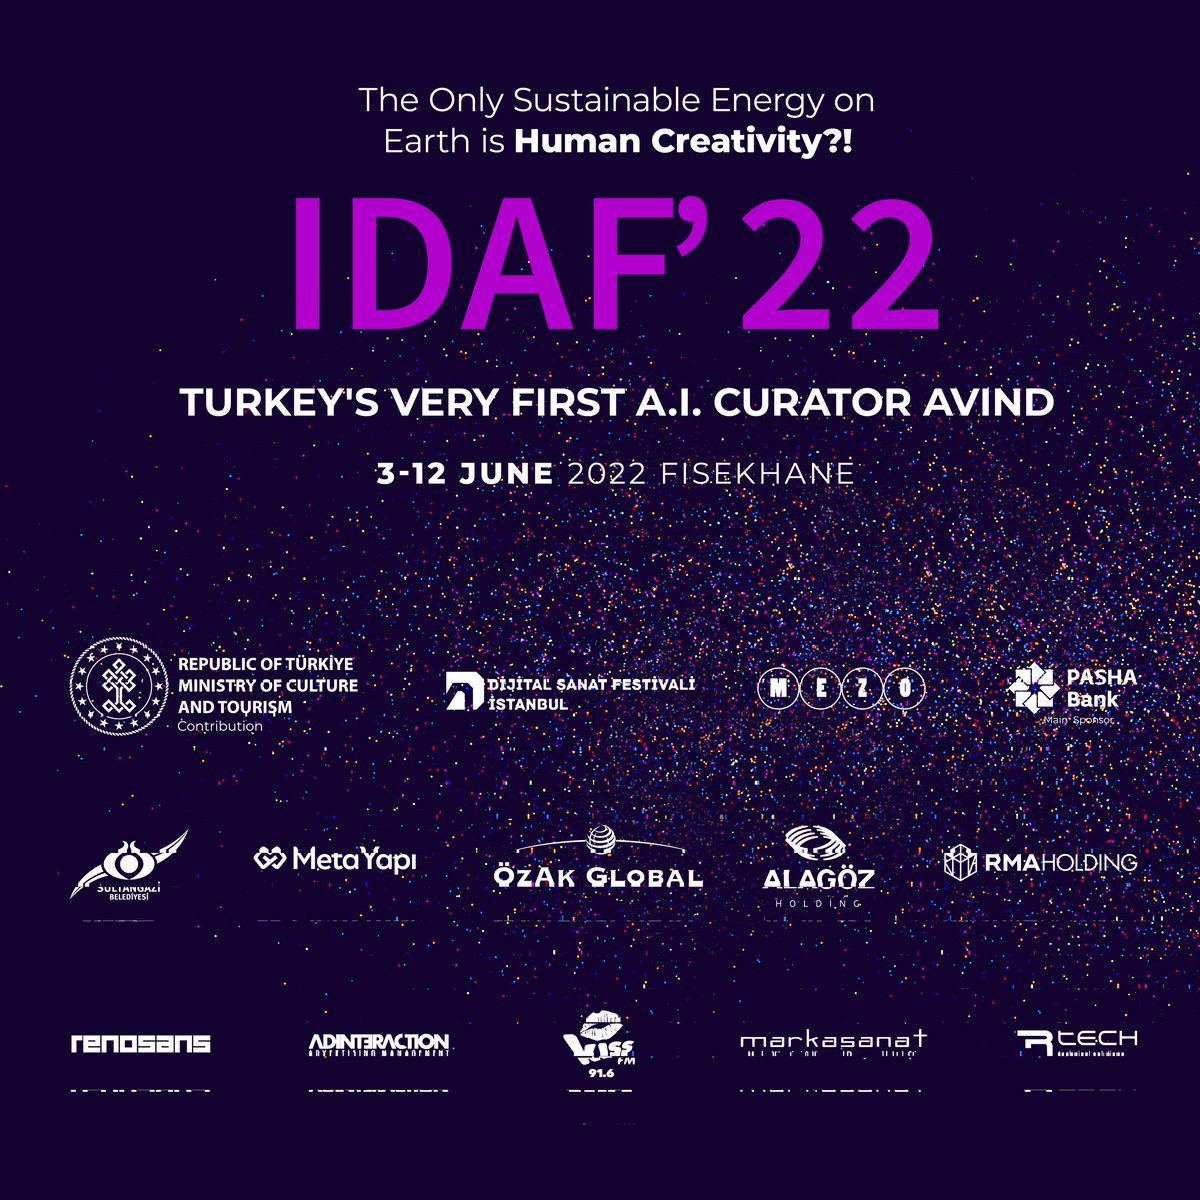 The 2nd Edition of the Digital Art Festival, which will take place in the company of Turkey's first artificial intelligence curator 'Avind', is in Fişekhane on 3-12 June 2022! For details, you can visit digitalartfestistanbul.org #IDSF22 #IDAF22 #FirstAICurator #Avind #Shusha